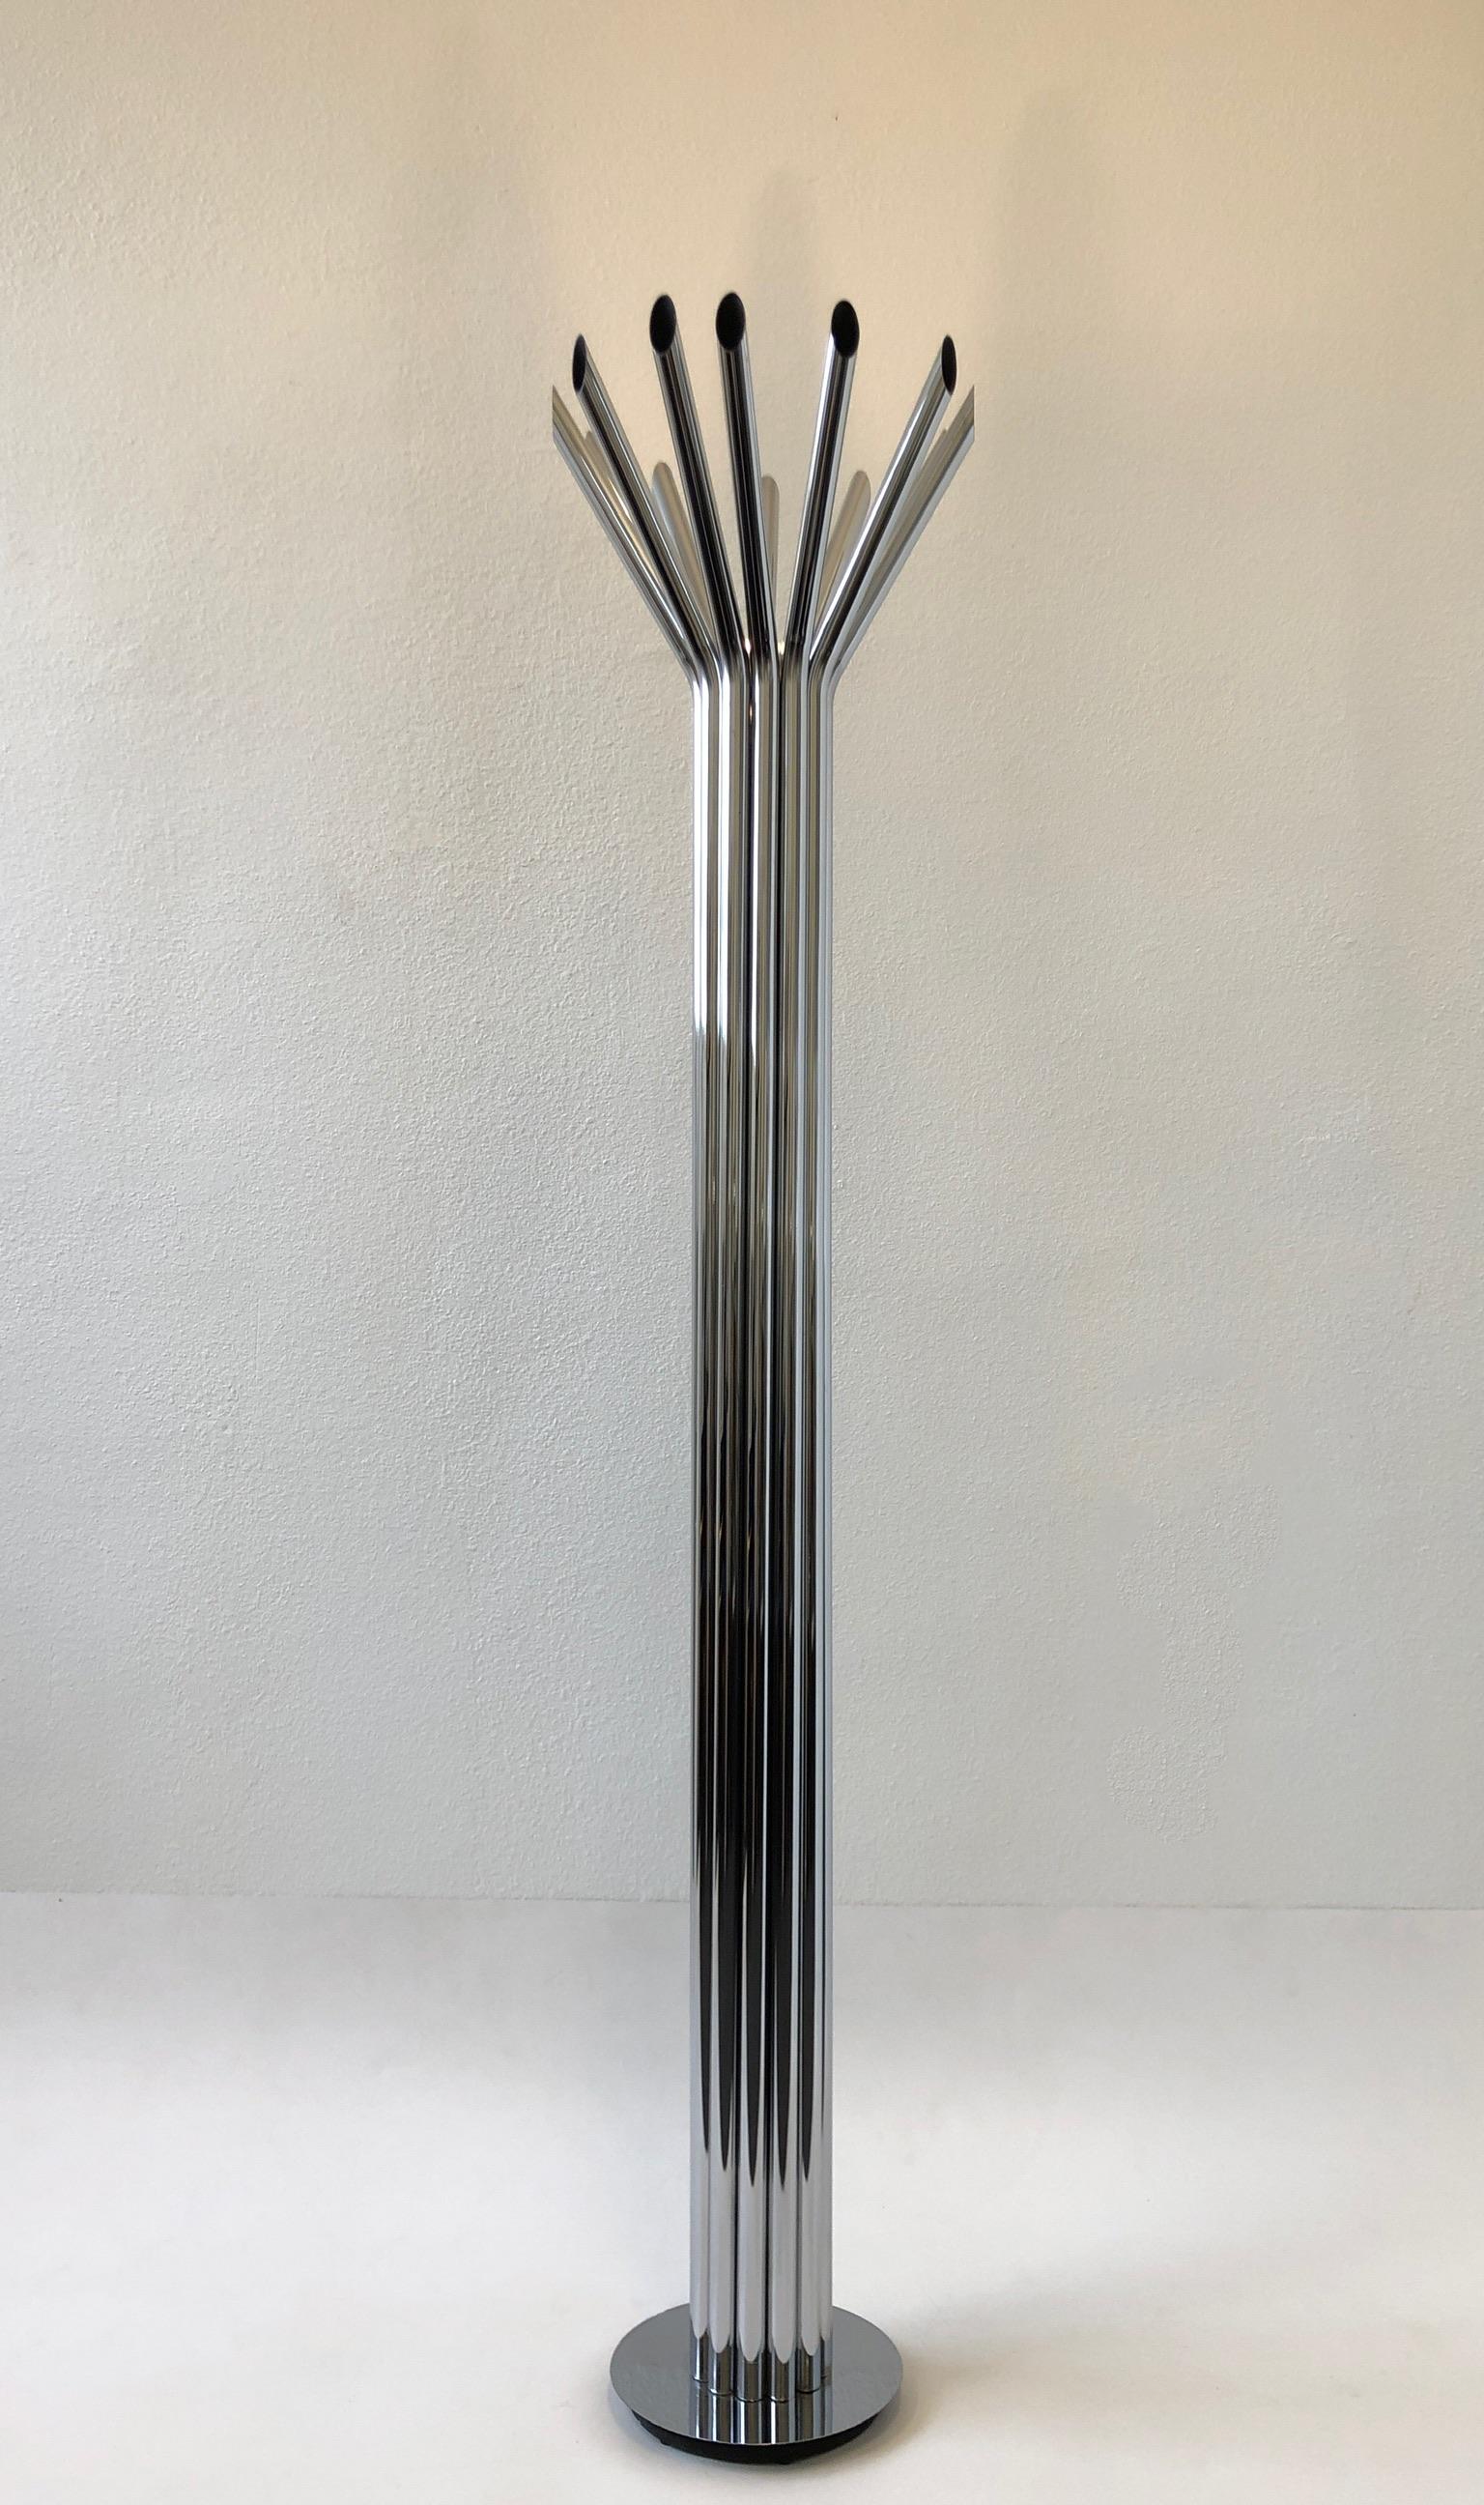 Polish chrome tubular torchiere floor lamp, design by George Kovacs in the 1980s.
Retains Kovacs tag (see detail photo).
The lamp has been newly rewired.
Measurements: 70” high, 16” diameter and 10” base.